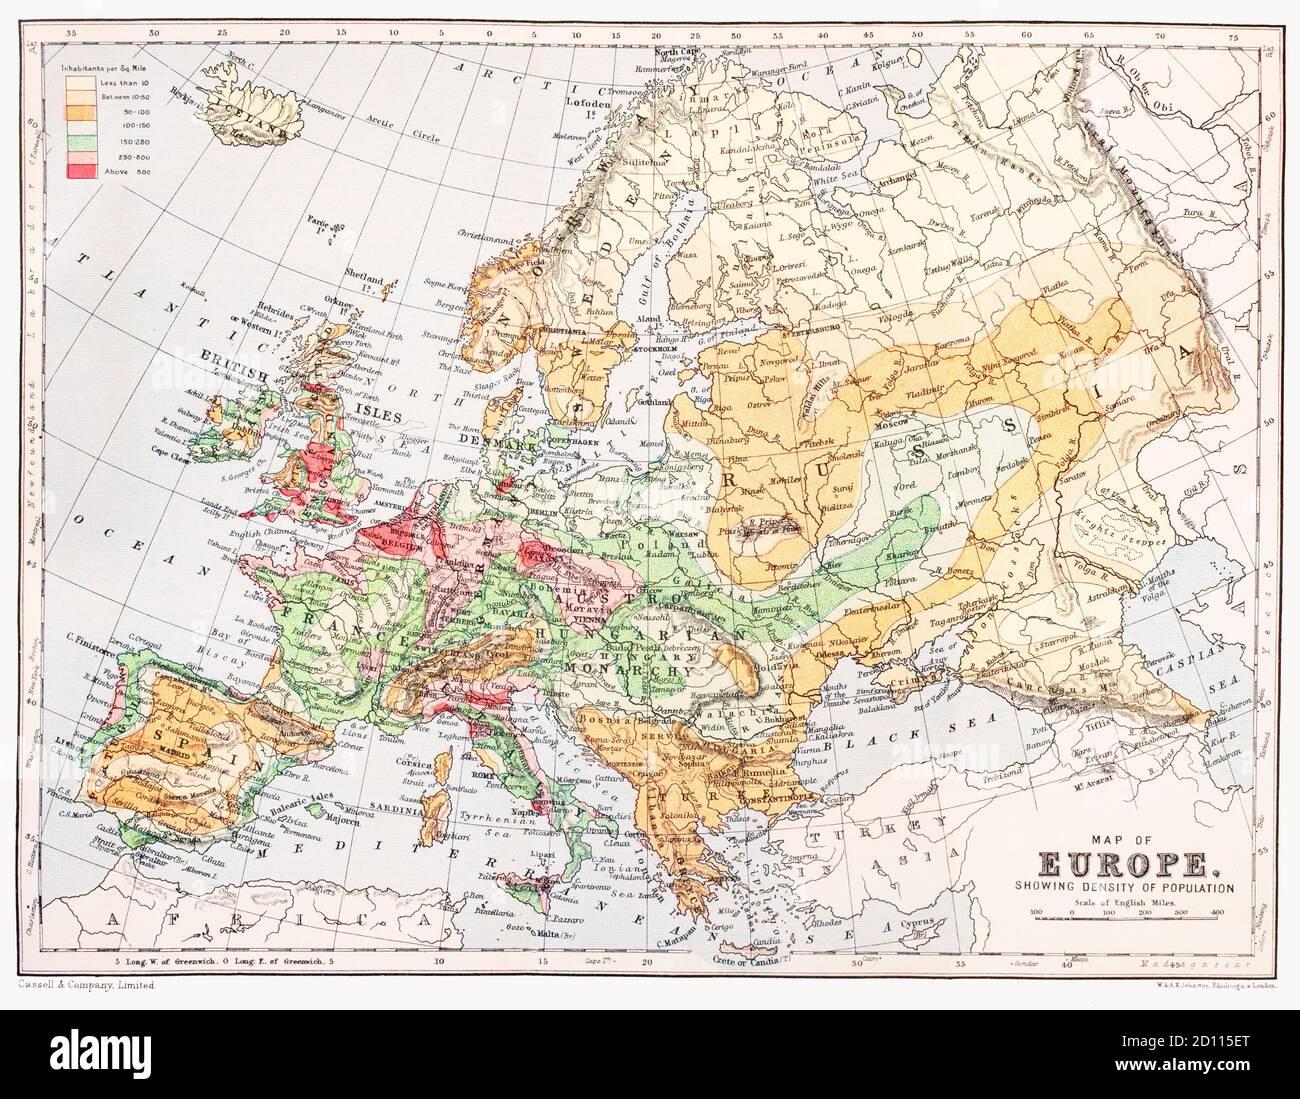 A late 19th Century map of Europe, showing its density of population. Note the names of some locations are no longer in use. Stock Photo